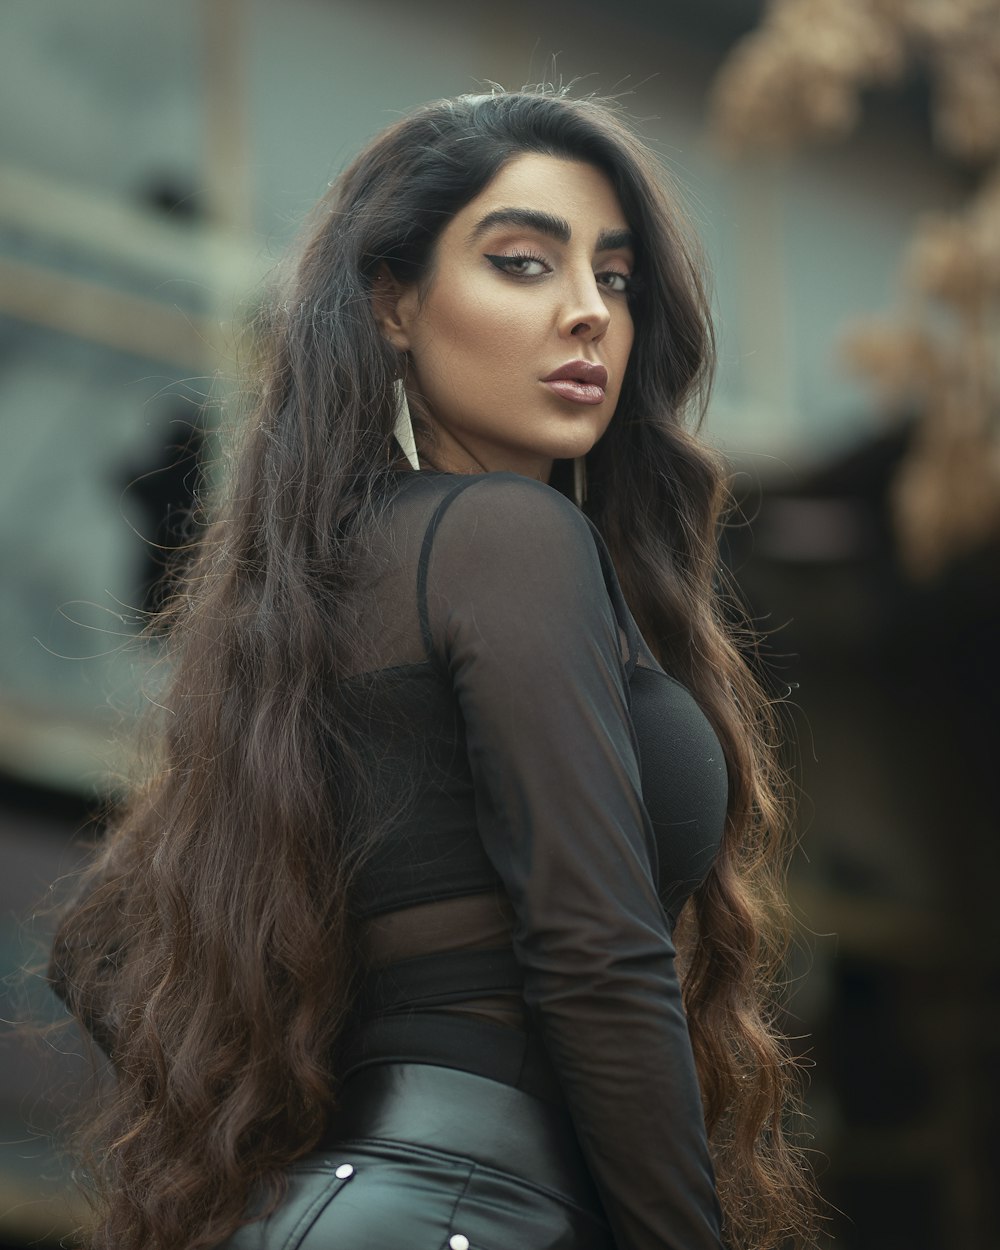 a woman with long hair wearing a black top